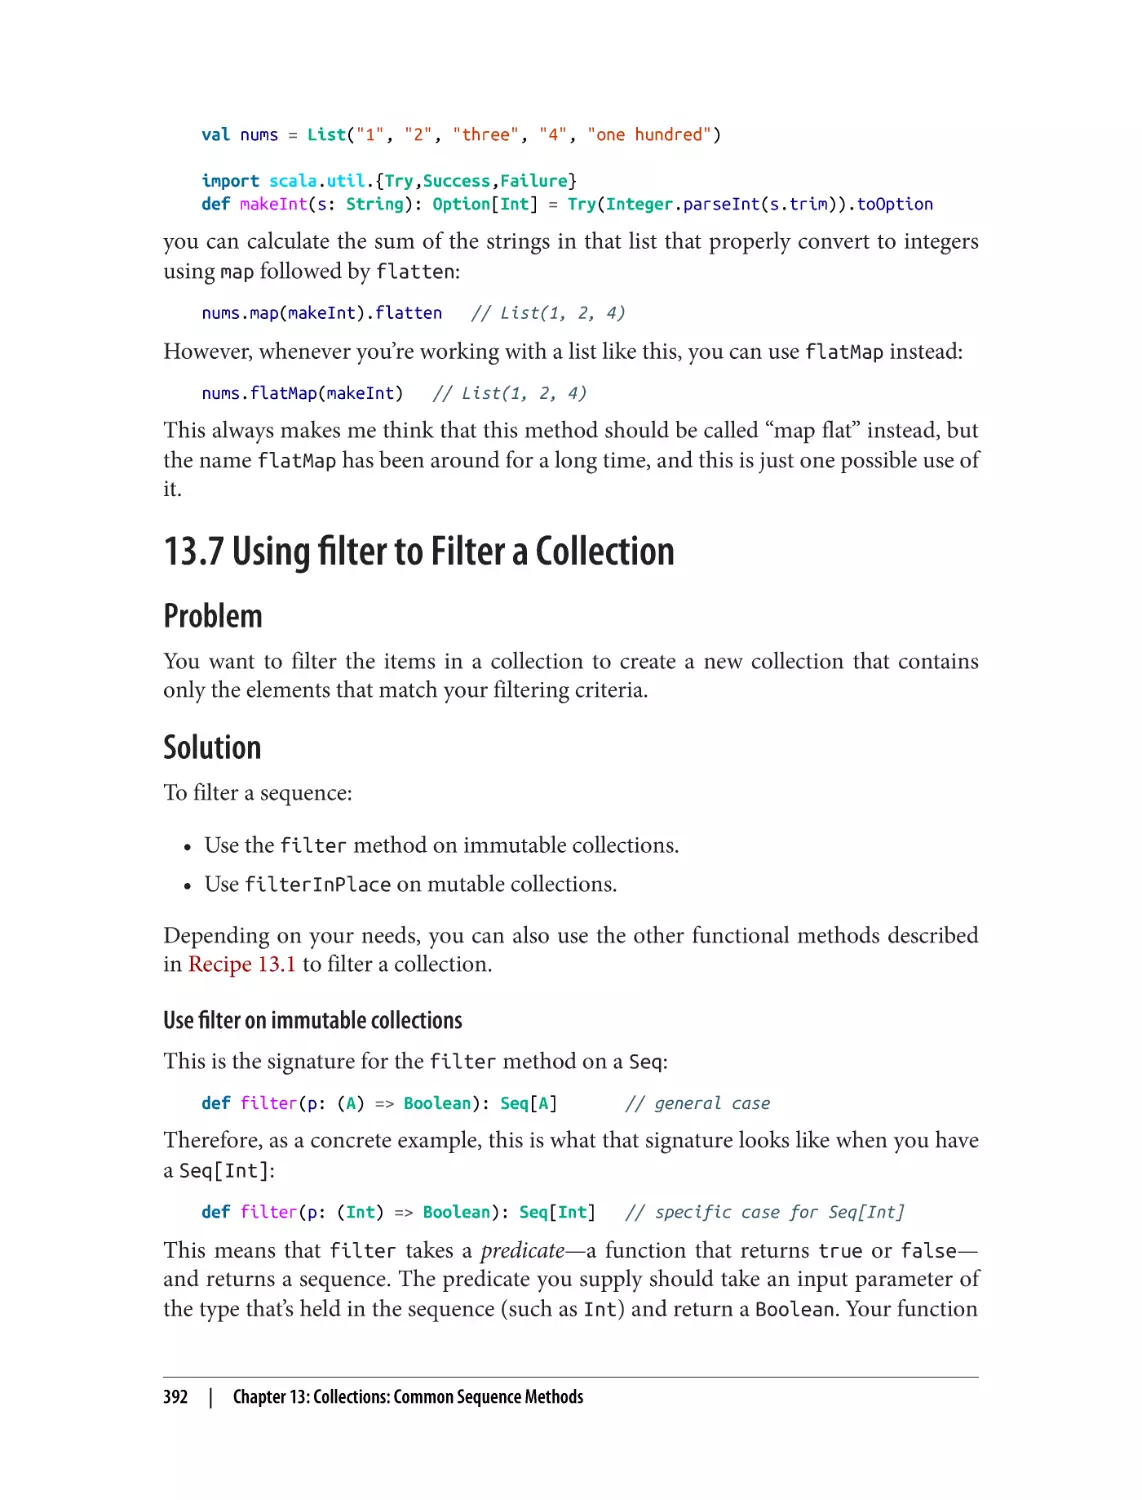 13.7 Using filter to Filter a Collection
Problem
Solution